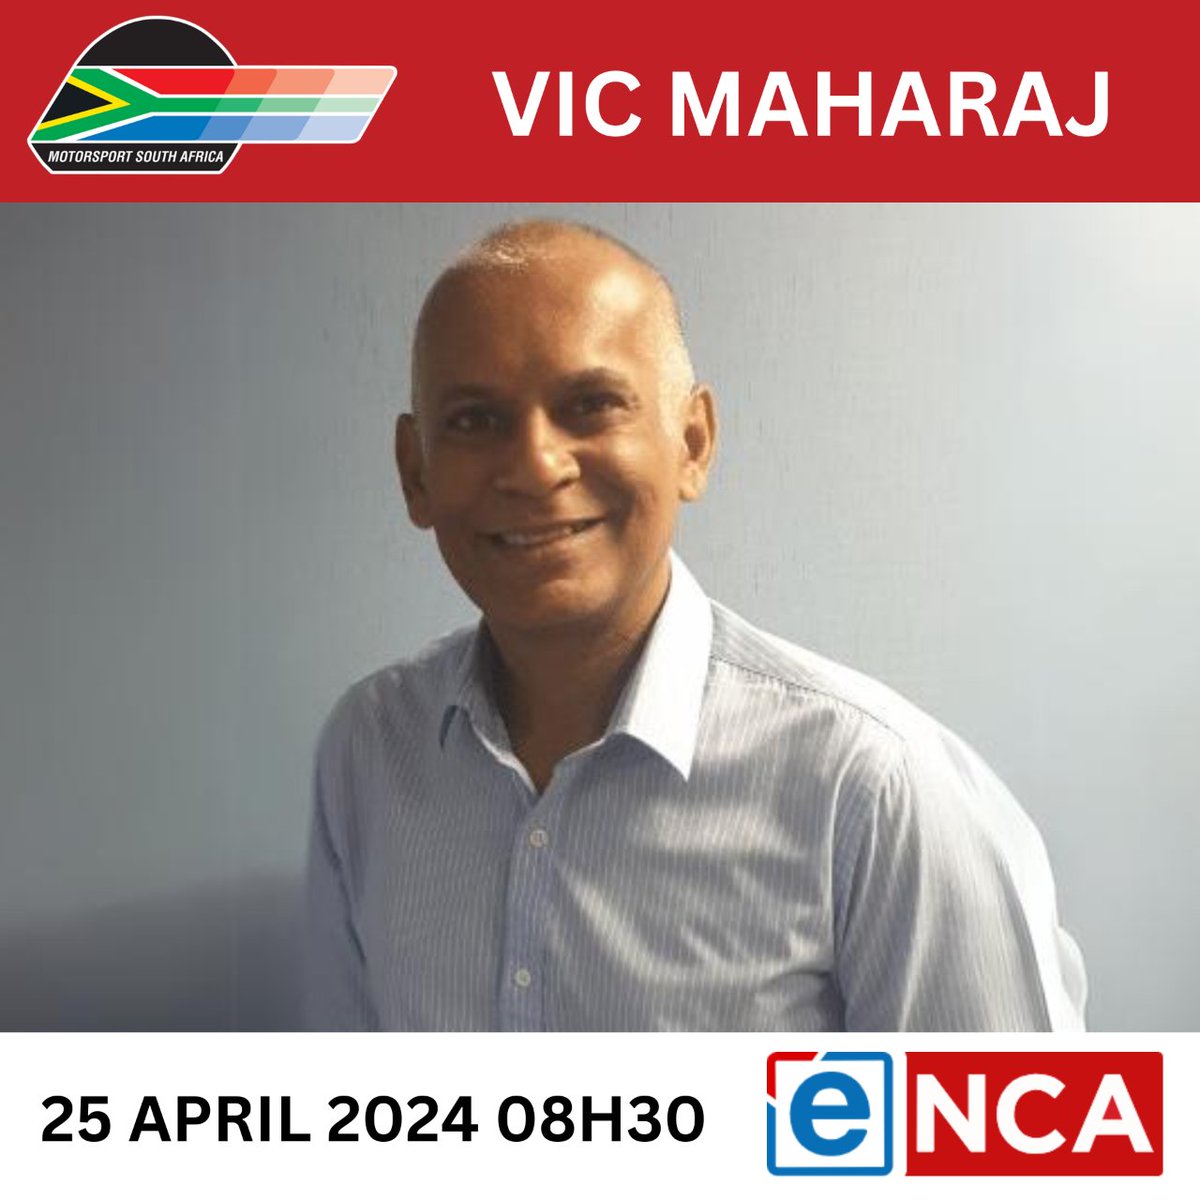 Tune in to eNCA on April 25th at 08h30 to catch our newly appointed CEO, Vic Maharaj, sharing insights and visions for the future of motorsport in our country 🌟 

#MotorsportSA #CEOInterview #VicMaharaj #eNCAInterview